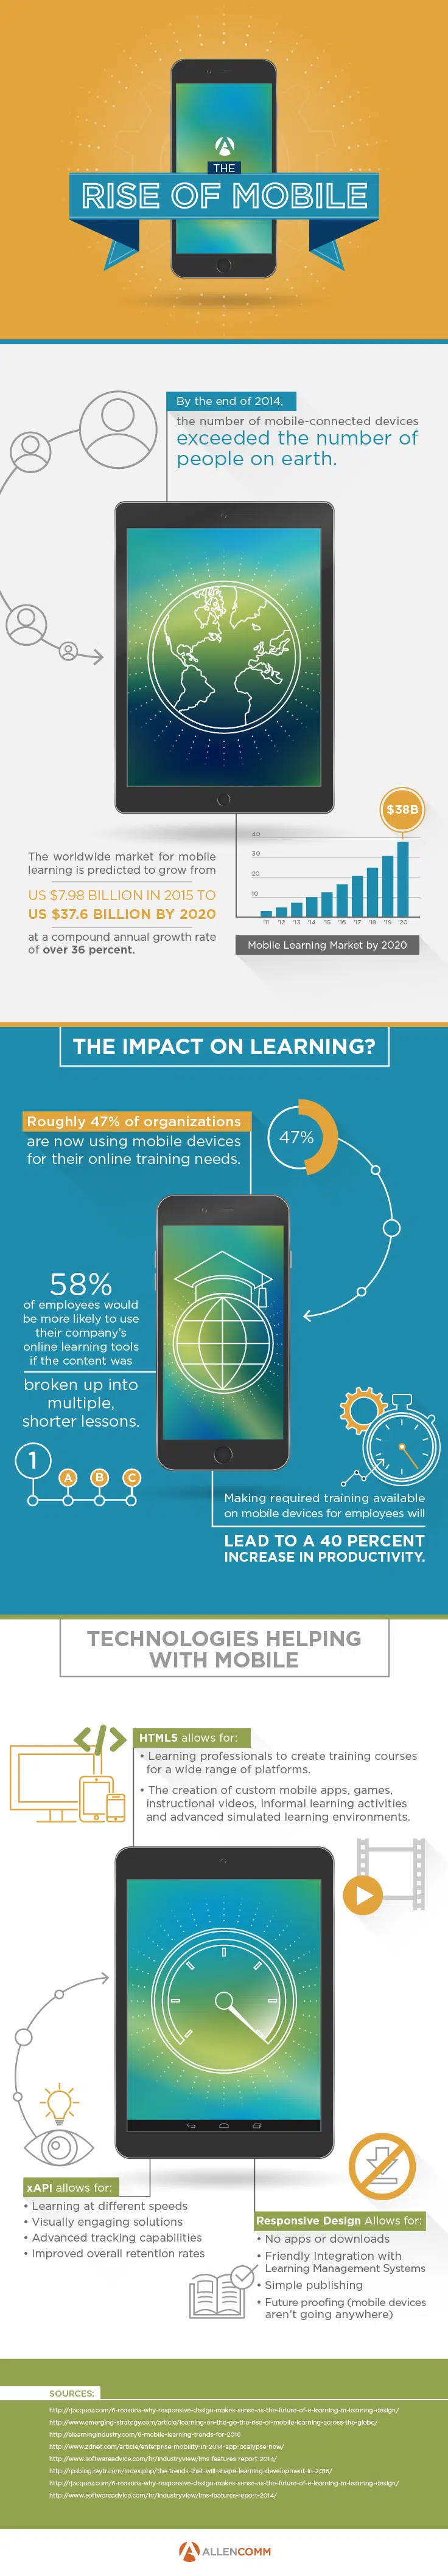 The Rise of Mobile Learning Infographic